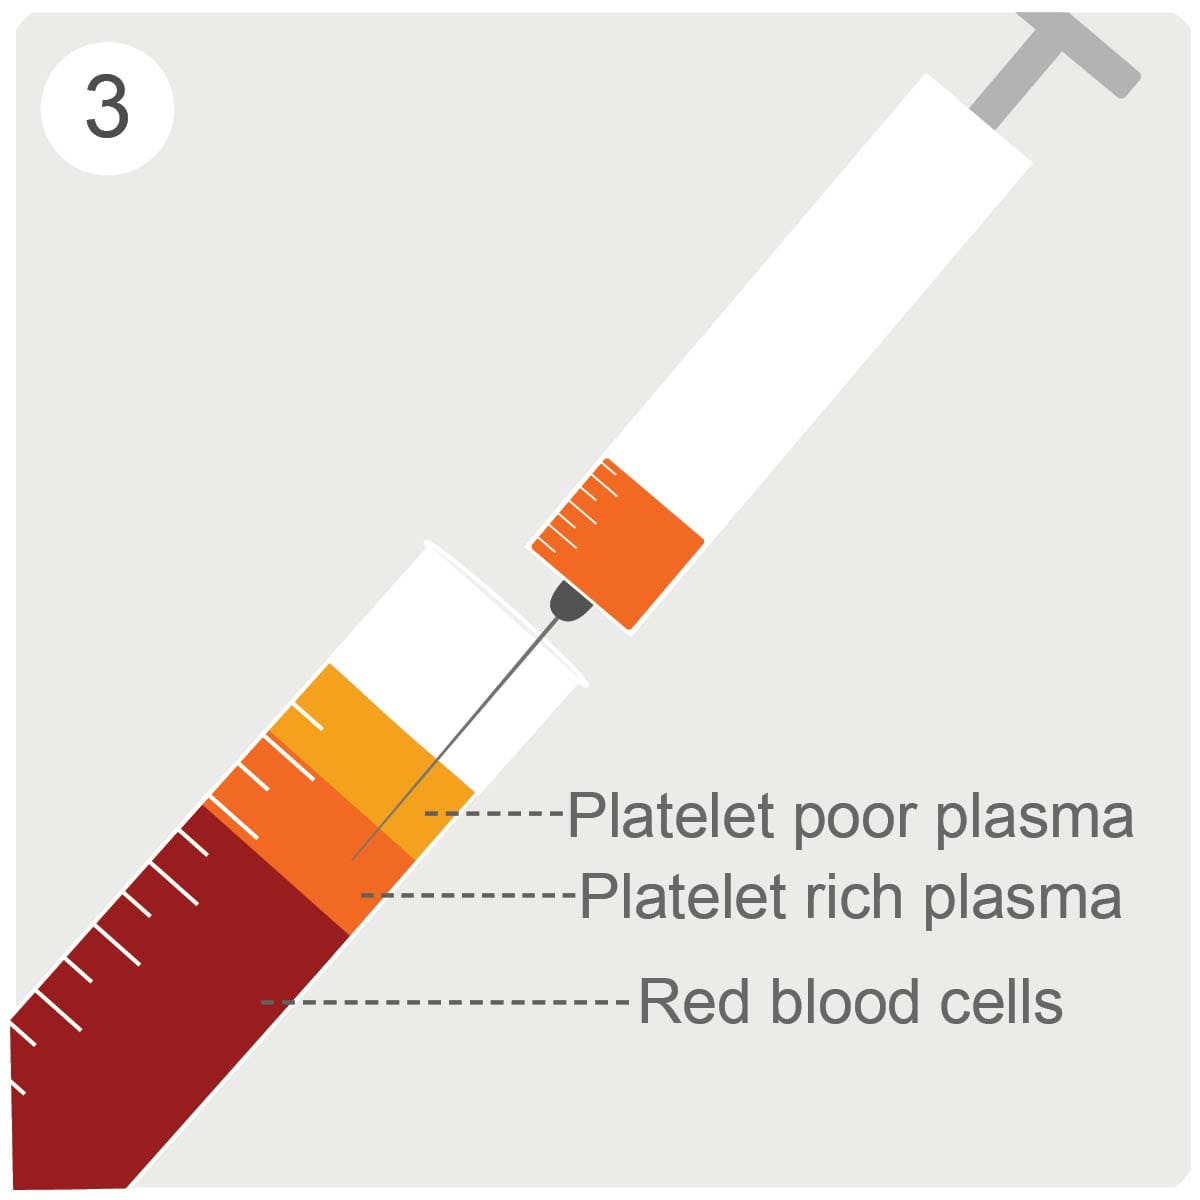 The plasma-rich platelets are drawn